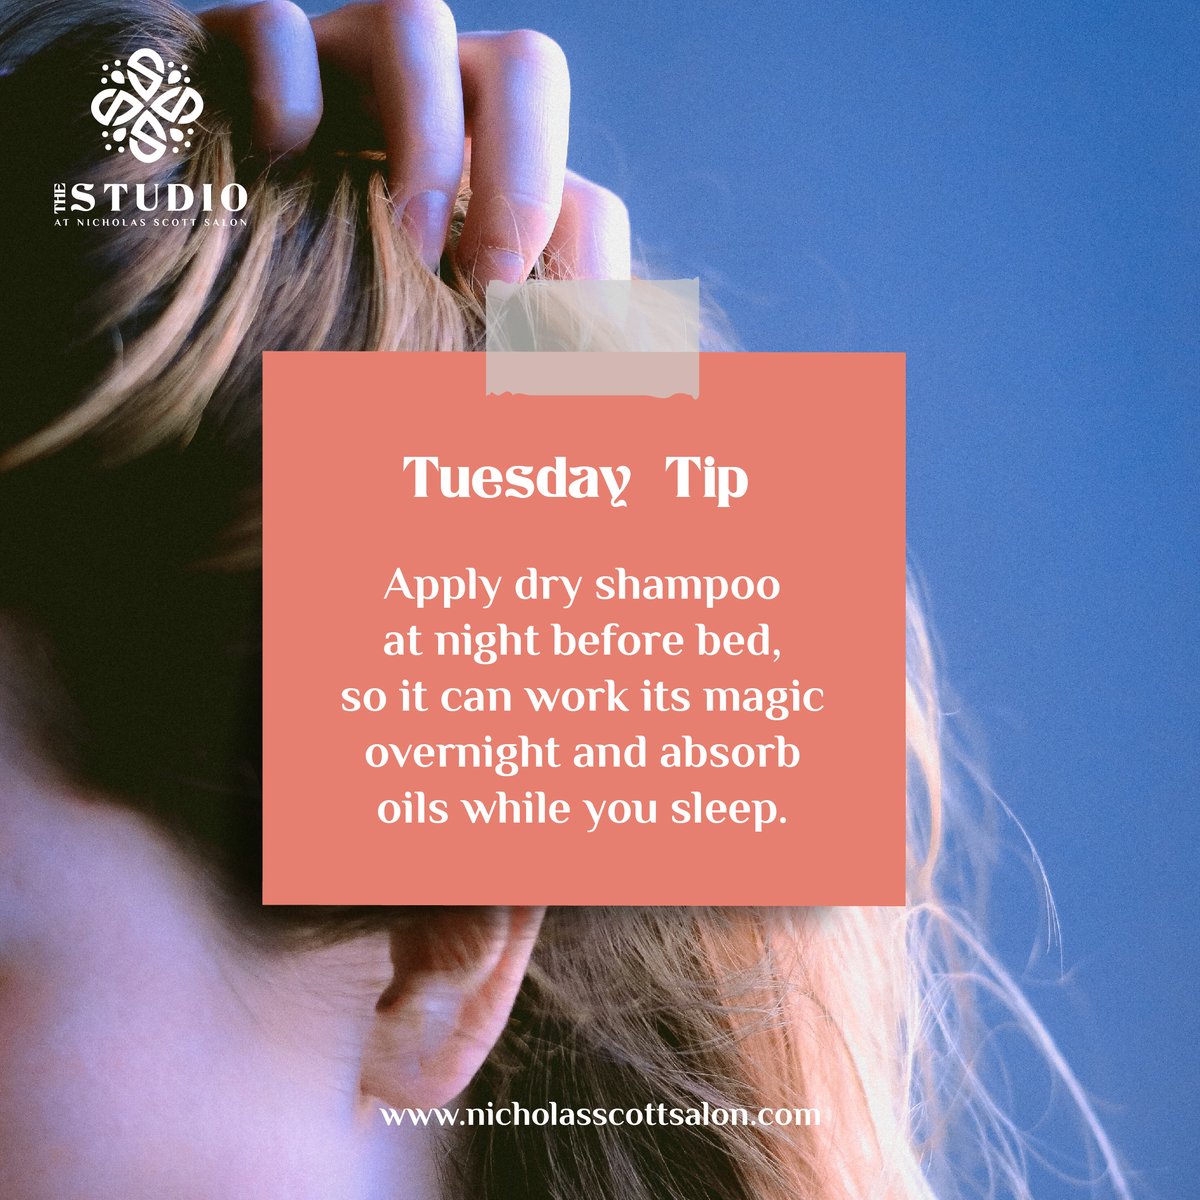 Say goodbye to oily hair in the morning with this hair hack! Apply dry shampoo before bed and wake up with fresh, voluminous hair.

Share your favorite hair care tip you know in the comments below.

#NicholasScottSalon #tiptuesday #dryshampoohack